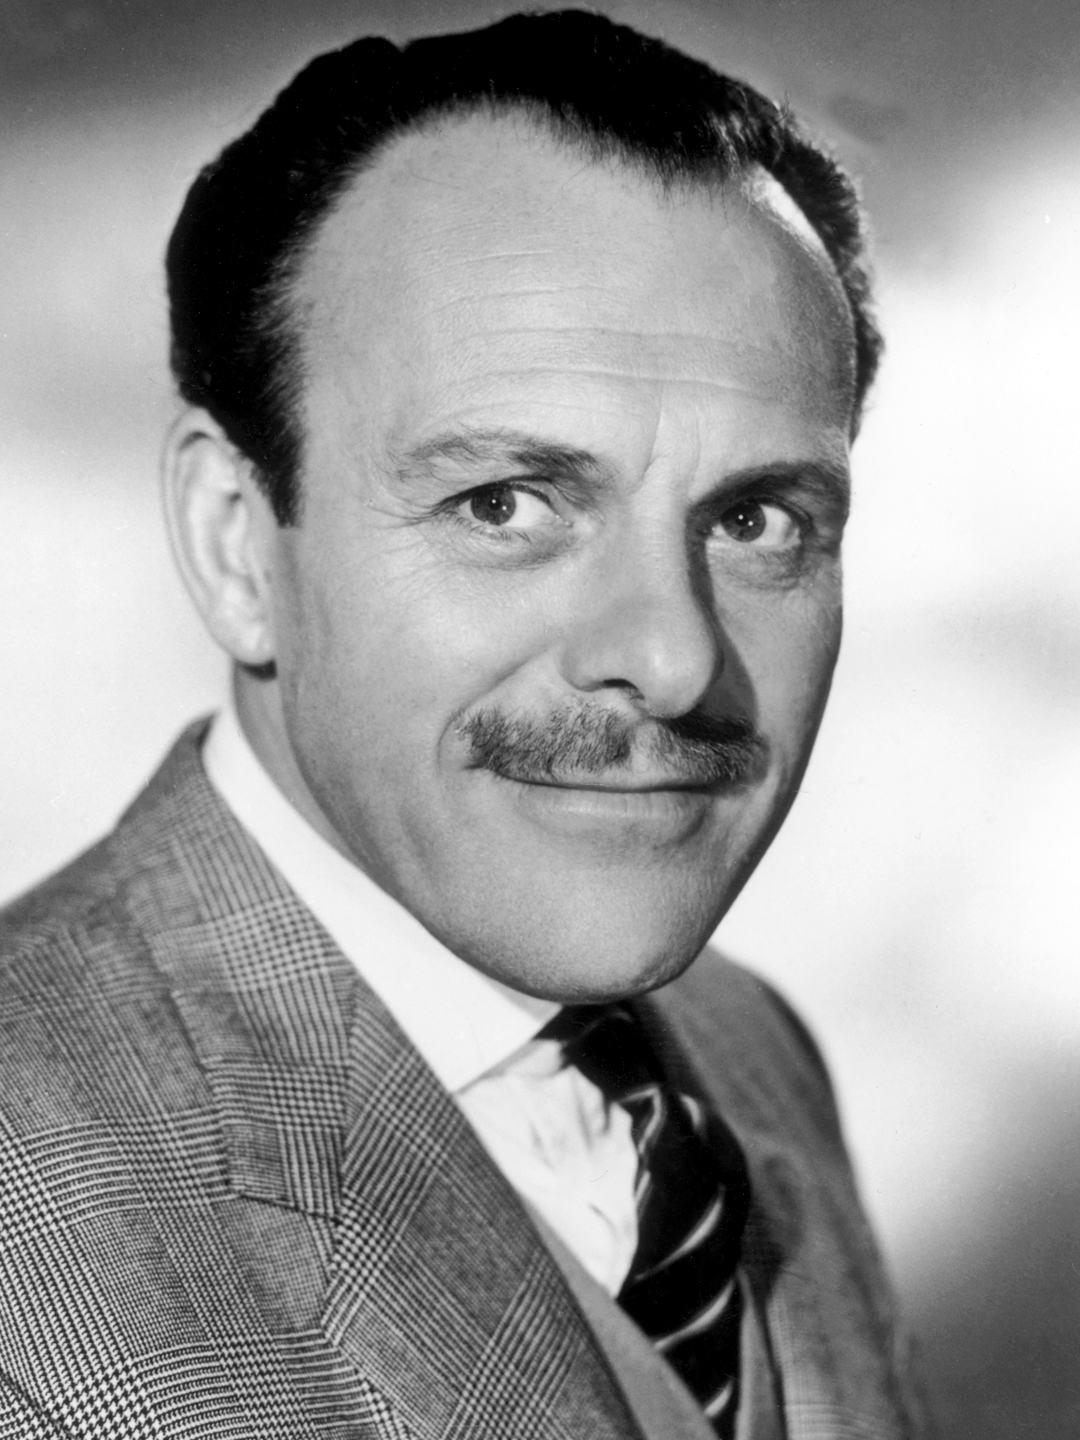 How tall is Terry Thomas?